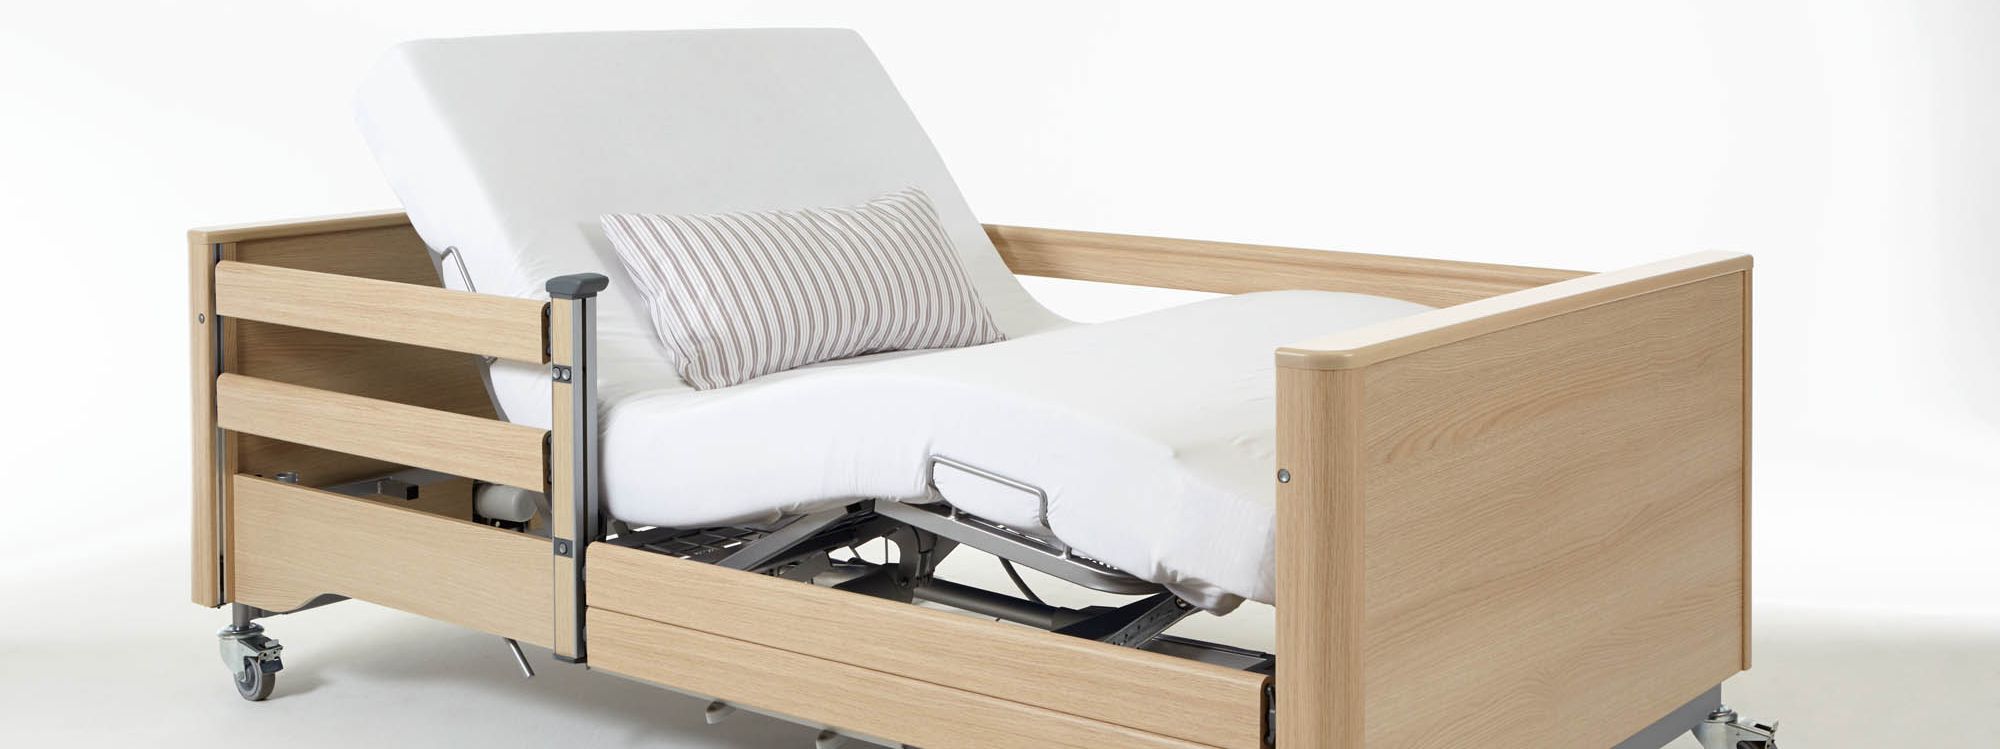 Combinable safety side systems on the Arena heavy-duty bed